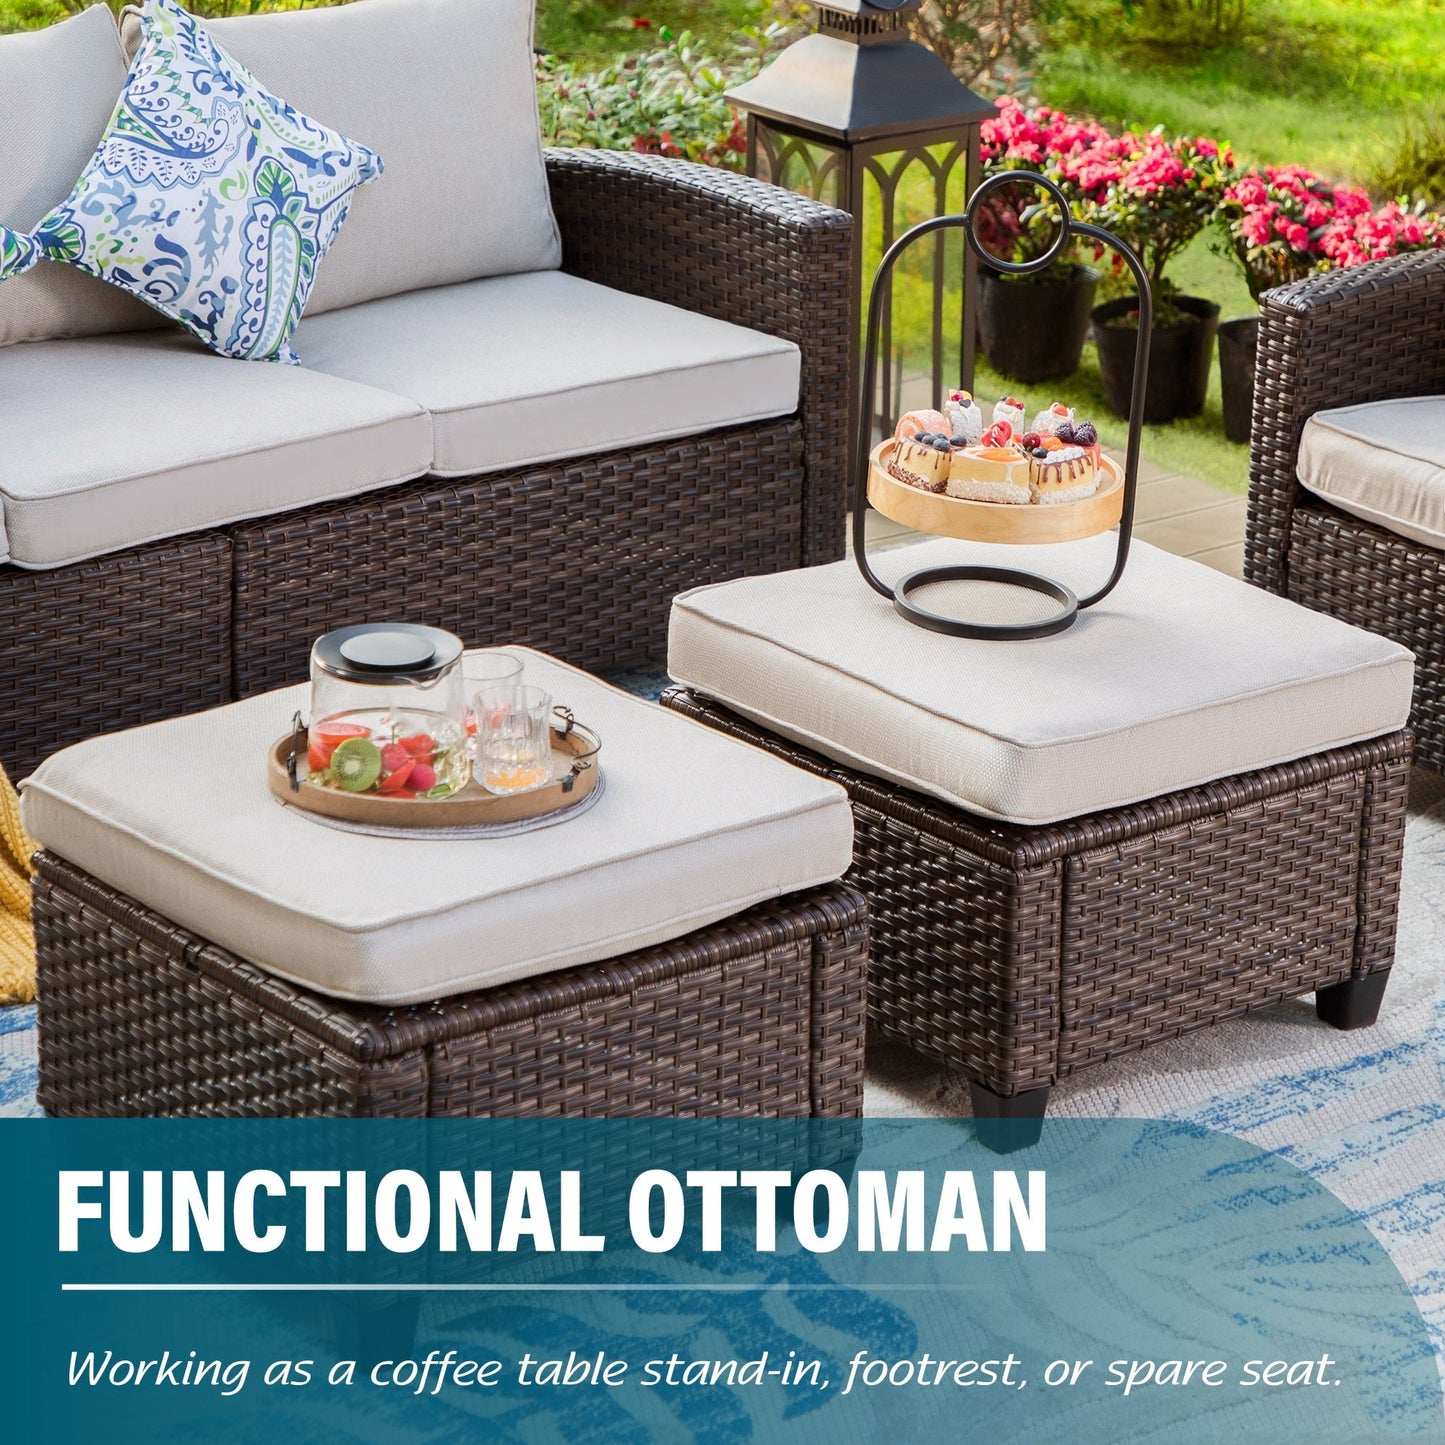 Sophia & William 7-seat Wicker Patio Converation Set with Fire Pit Table, Beige